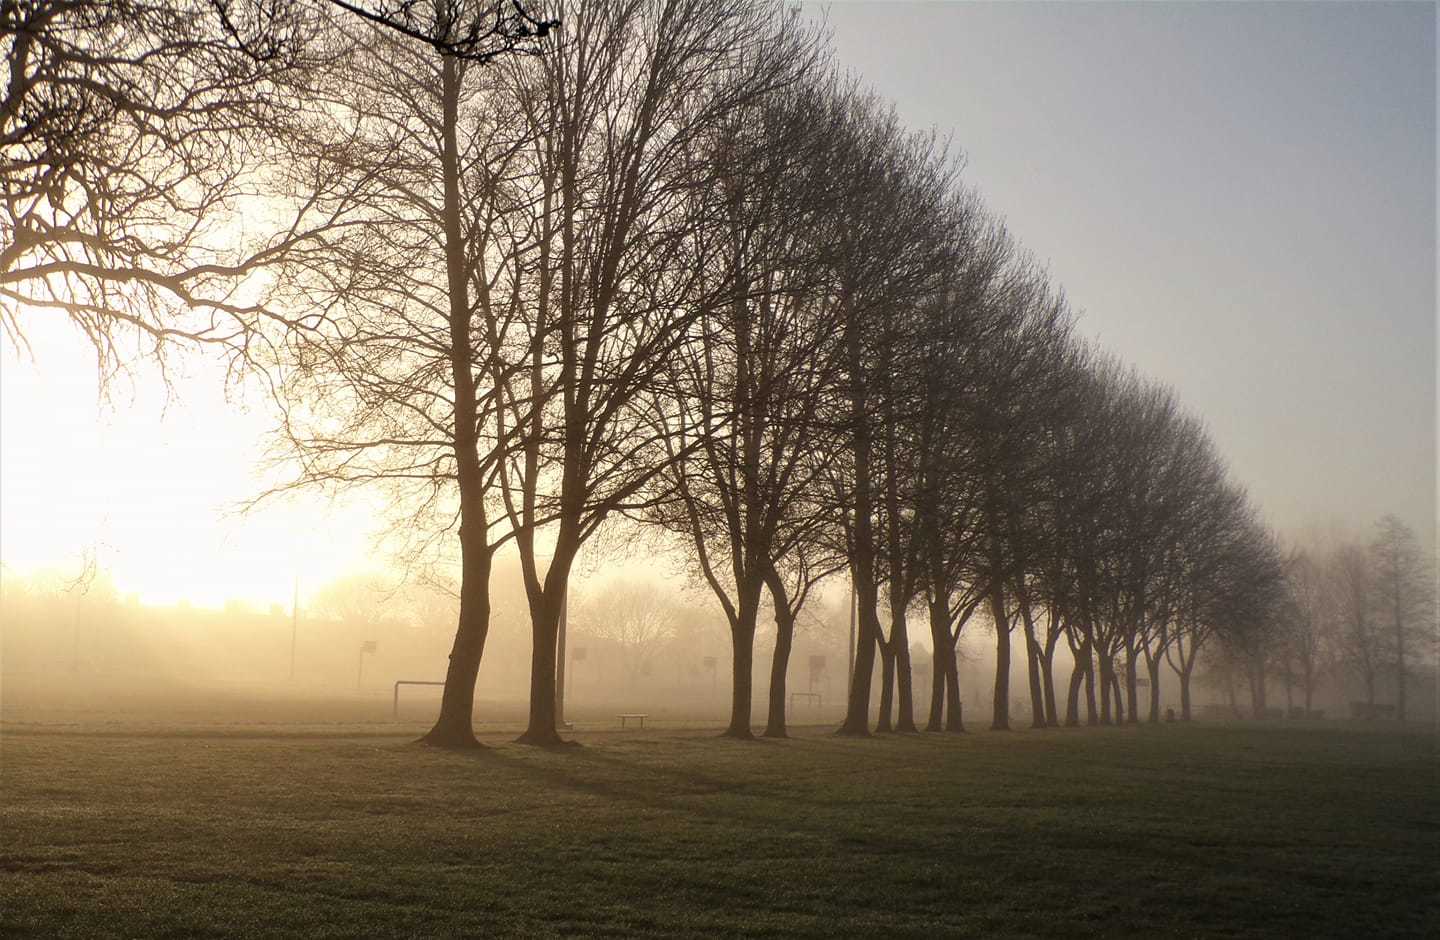 Misty morning in Queens Park by Suzie Remadems